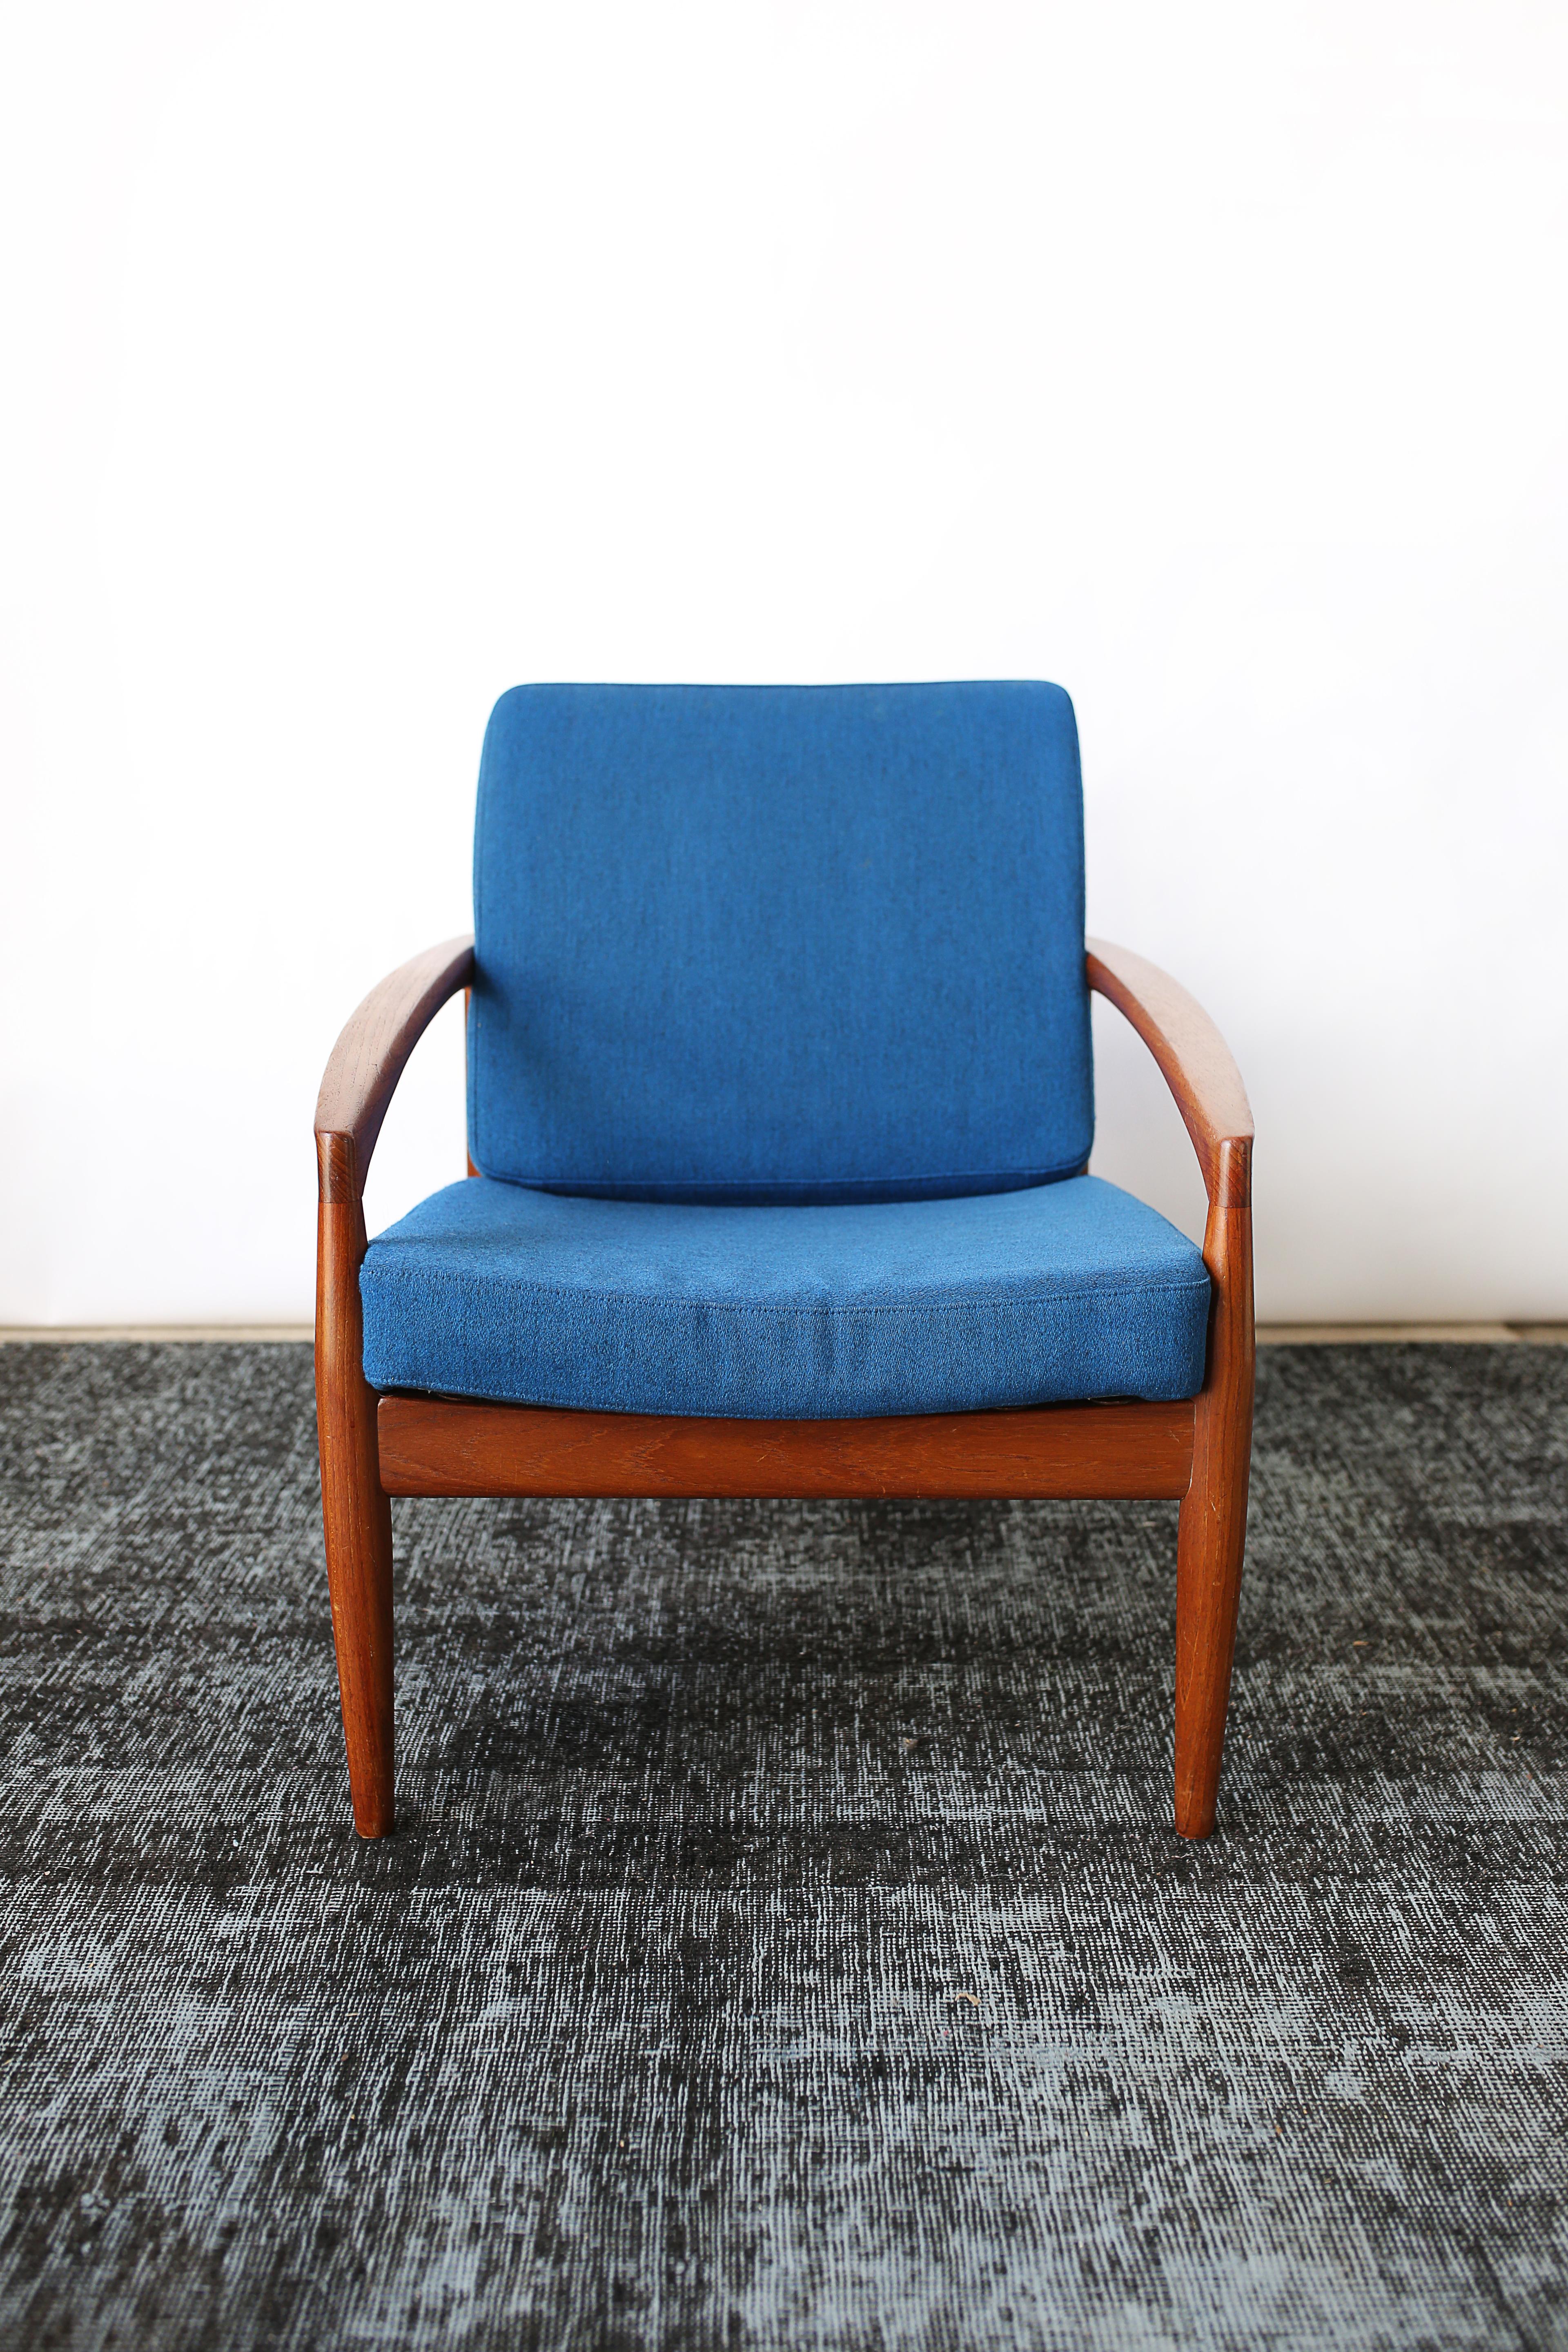 This pair of solid teak 'Paper Knife' lounge chairs by Kai Kristiansen for Magnus Olesen are in overall good condition and wear consistent with age and use. Clean-lined and comfortable. Solid Teak frame. Original blue wool upholstery.
1955.